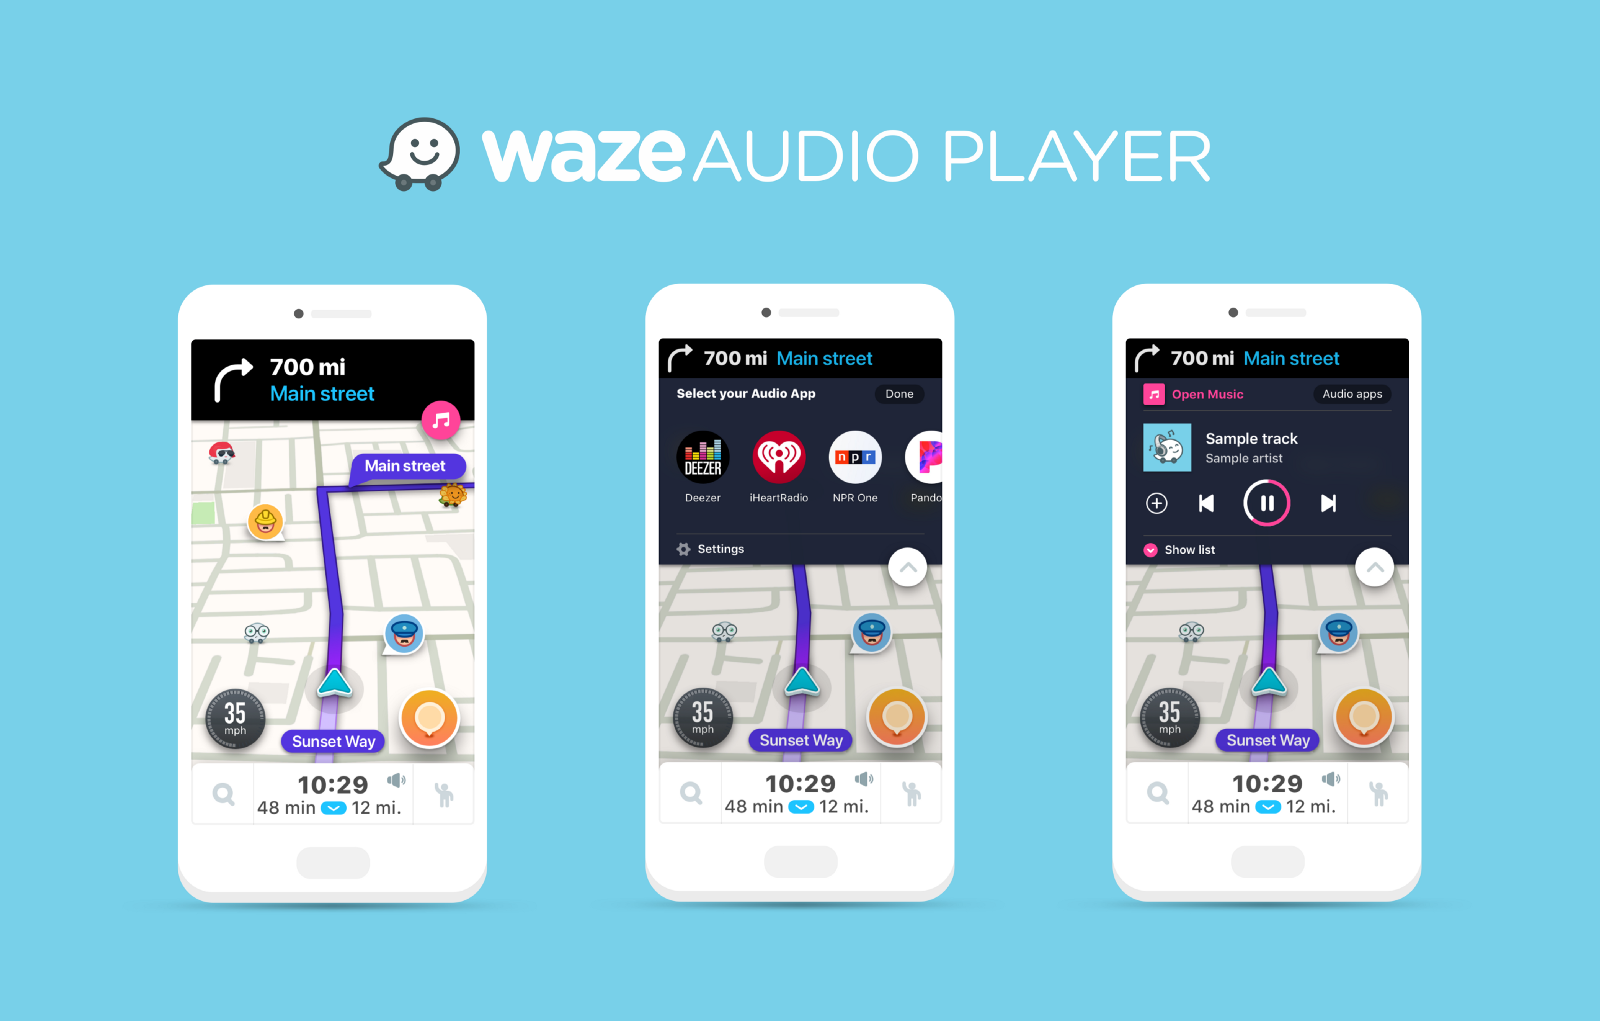 Pandora, Deezer, iHeart, TuneIn now playing on your drives with Waze